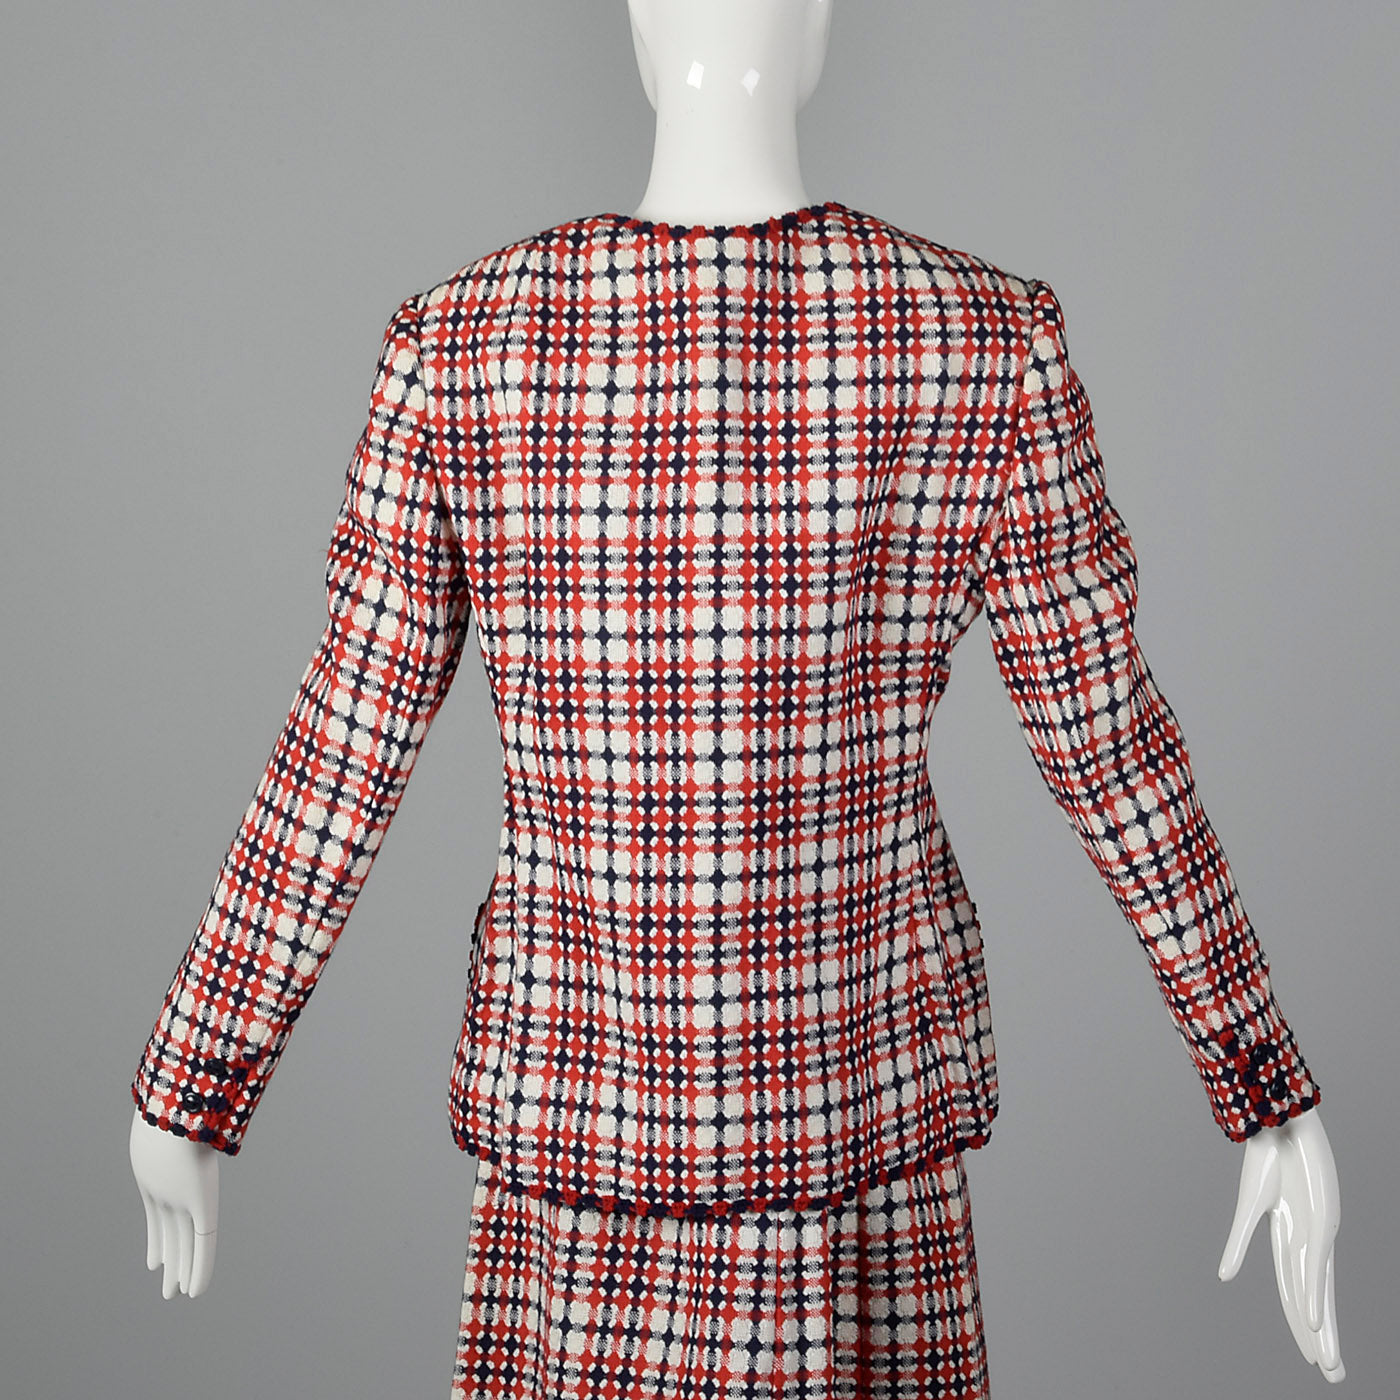 1960s Dress Set in Red and Navy Plaid